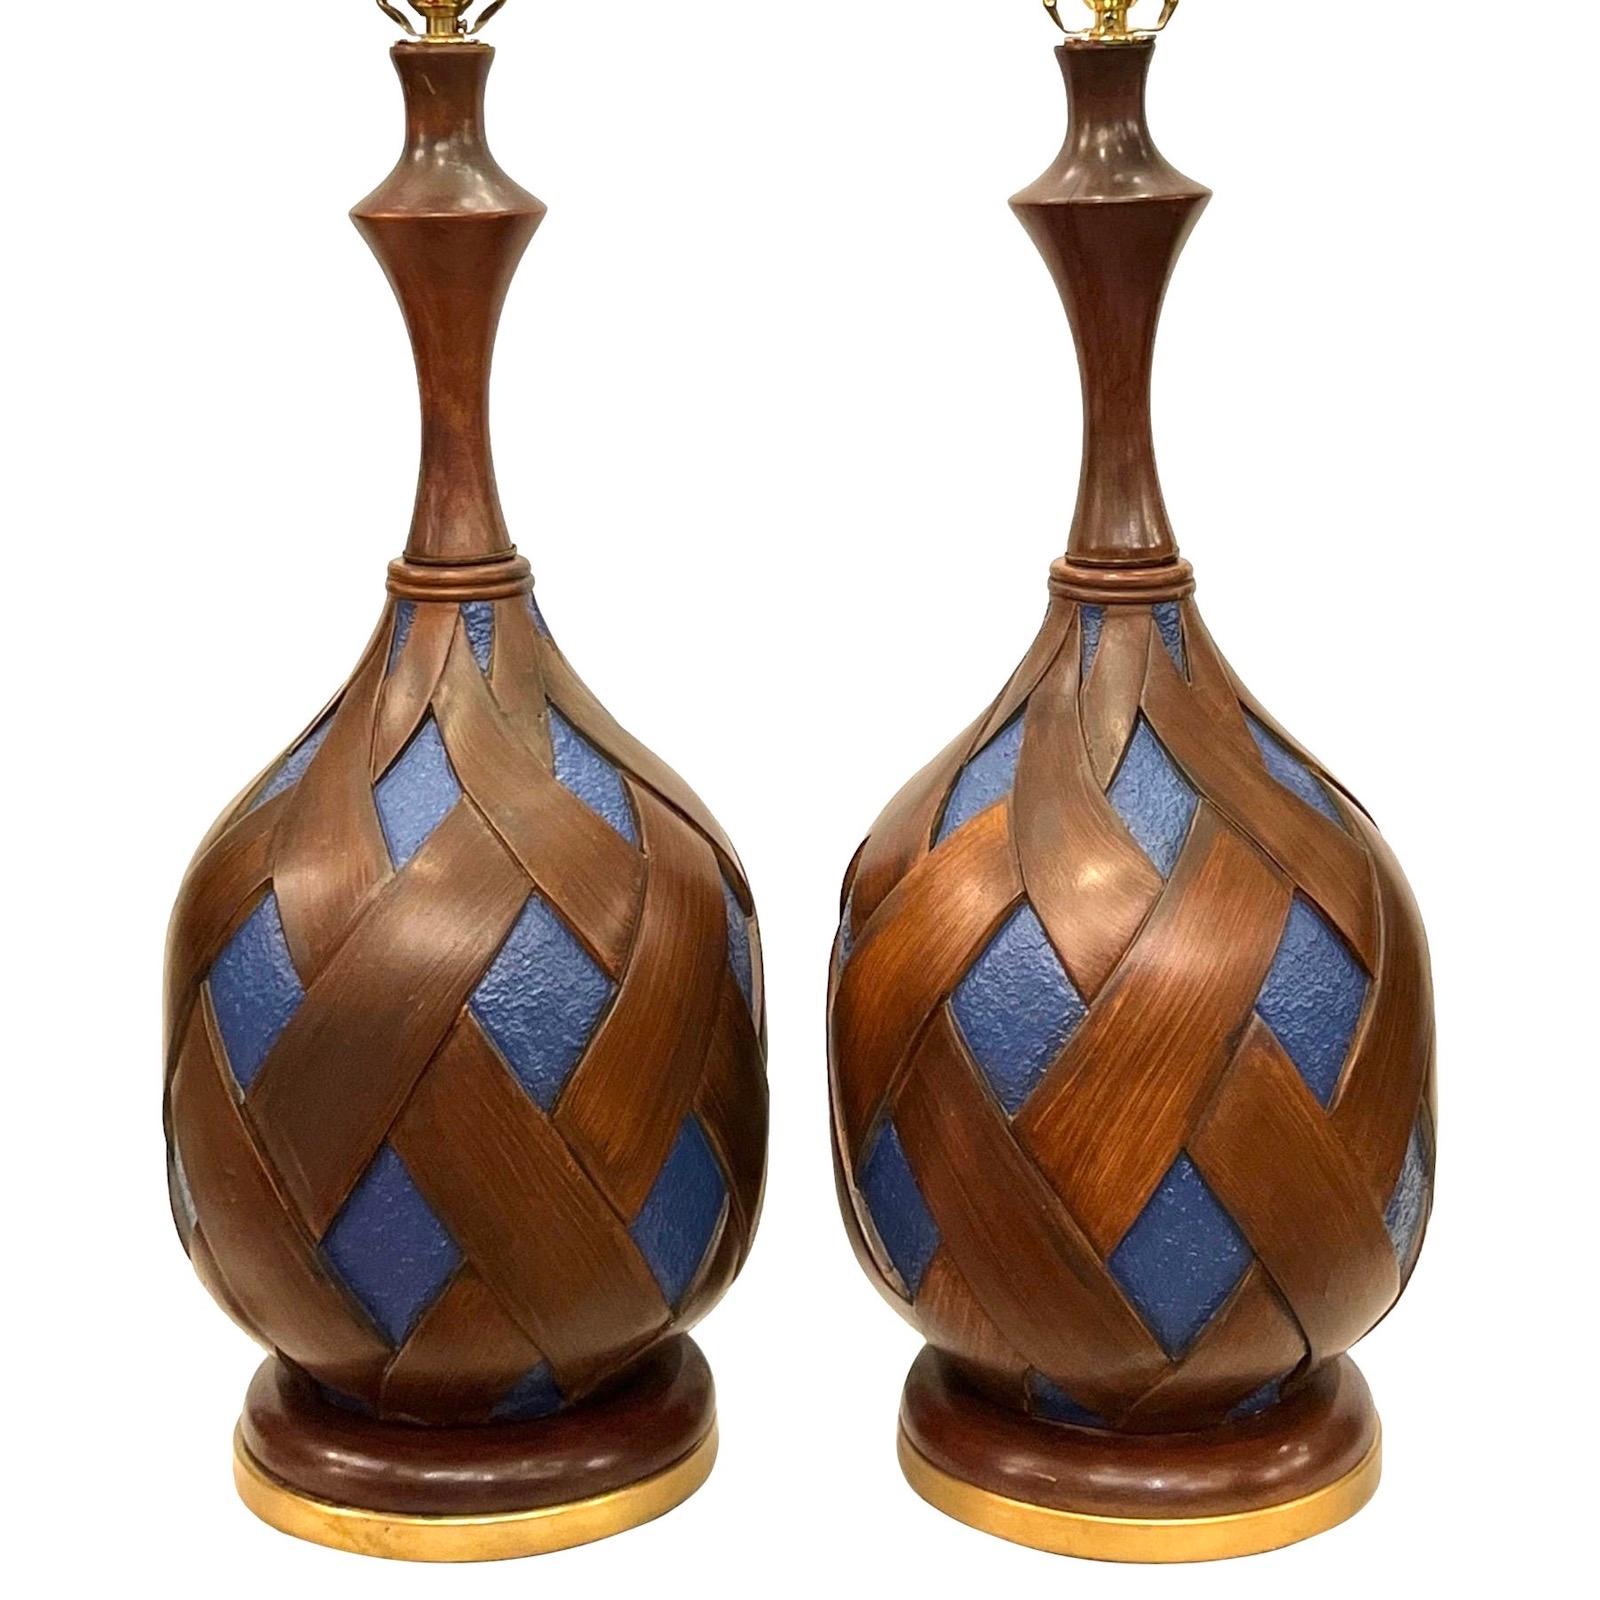 Pair of American mid century table lamps with lattice pattern over a blue background.

Measurements:
Height of body: 25